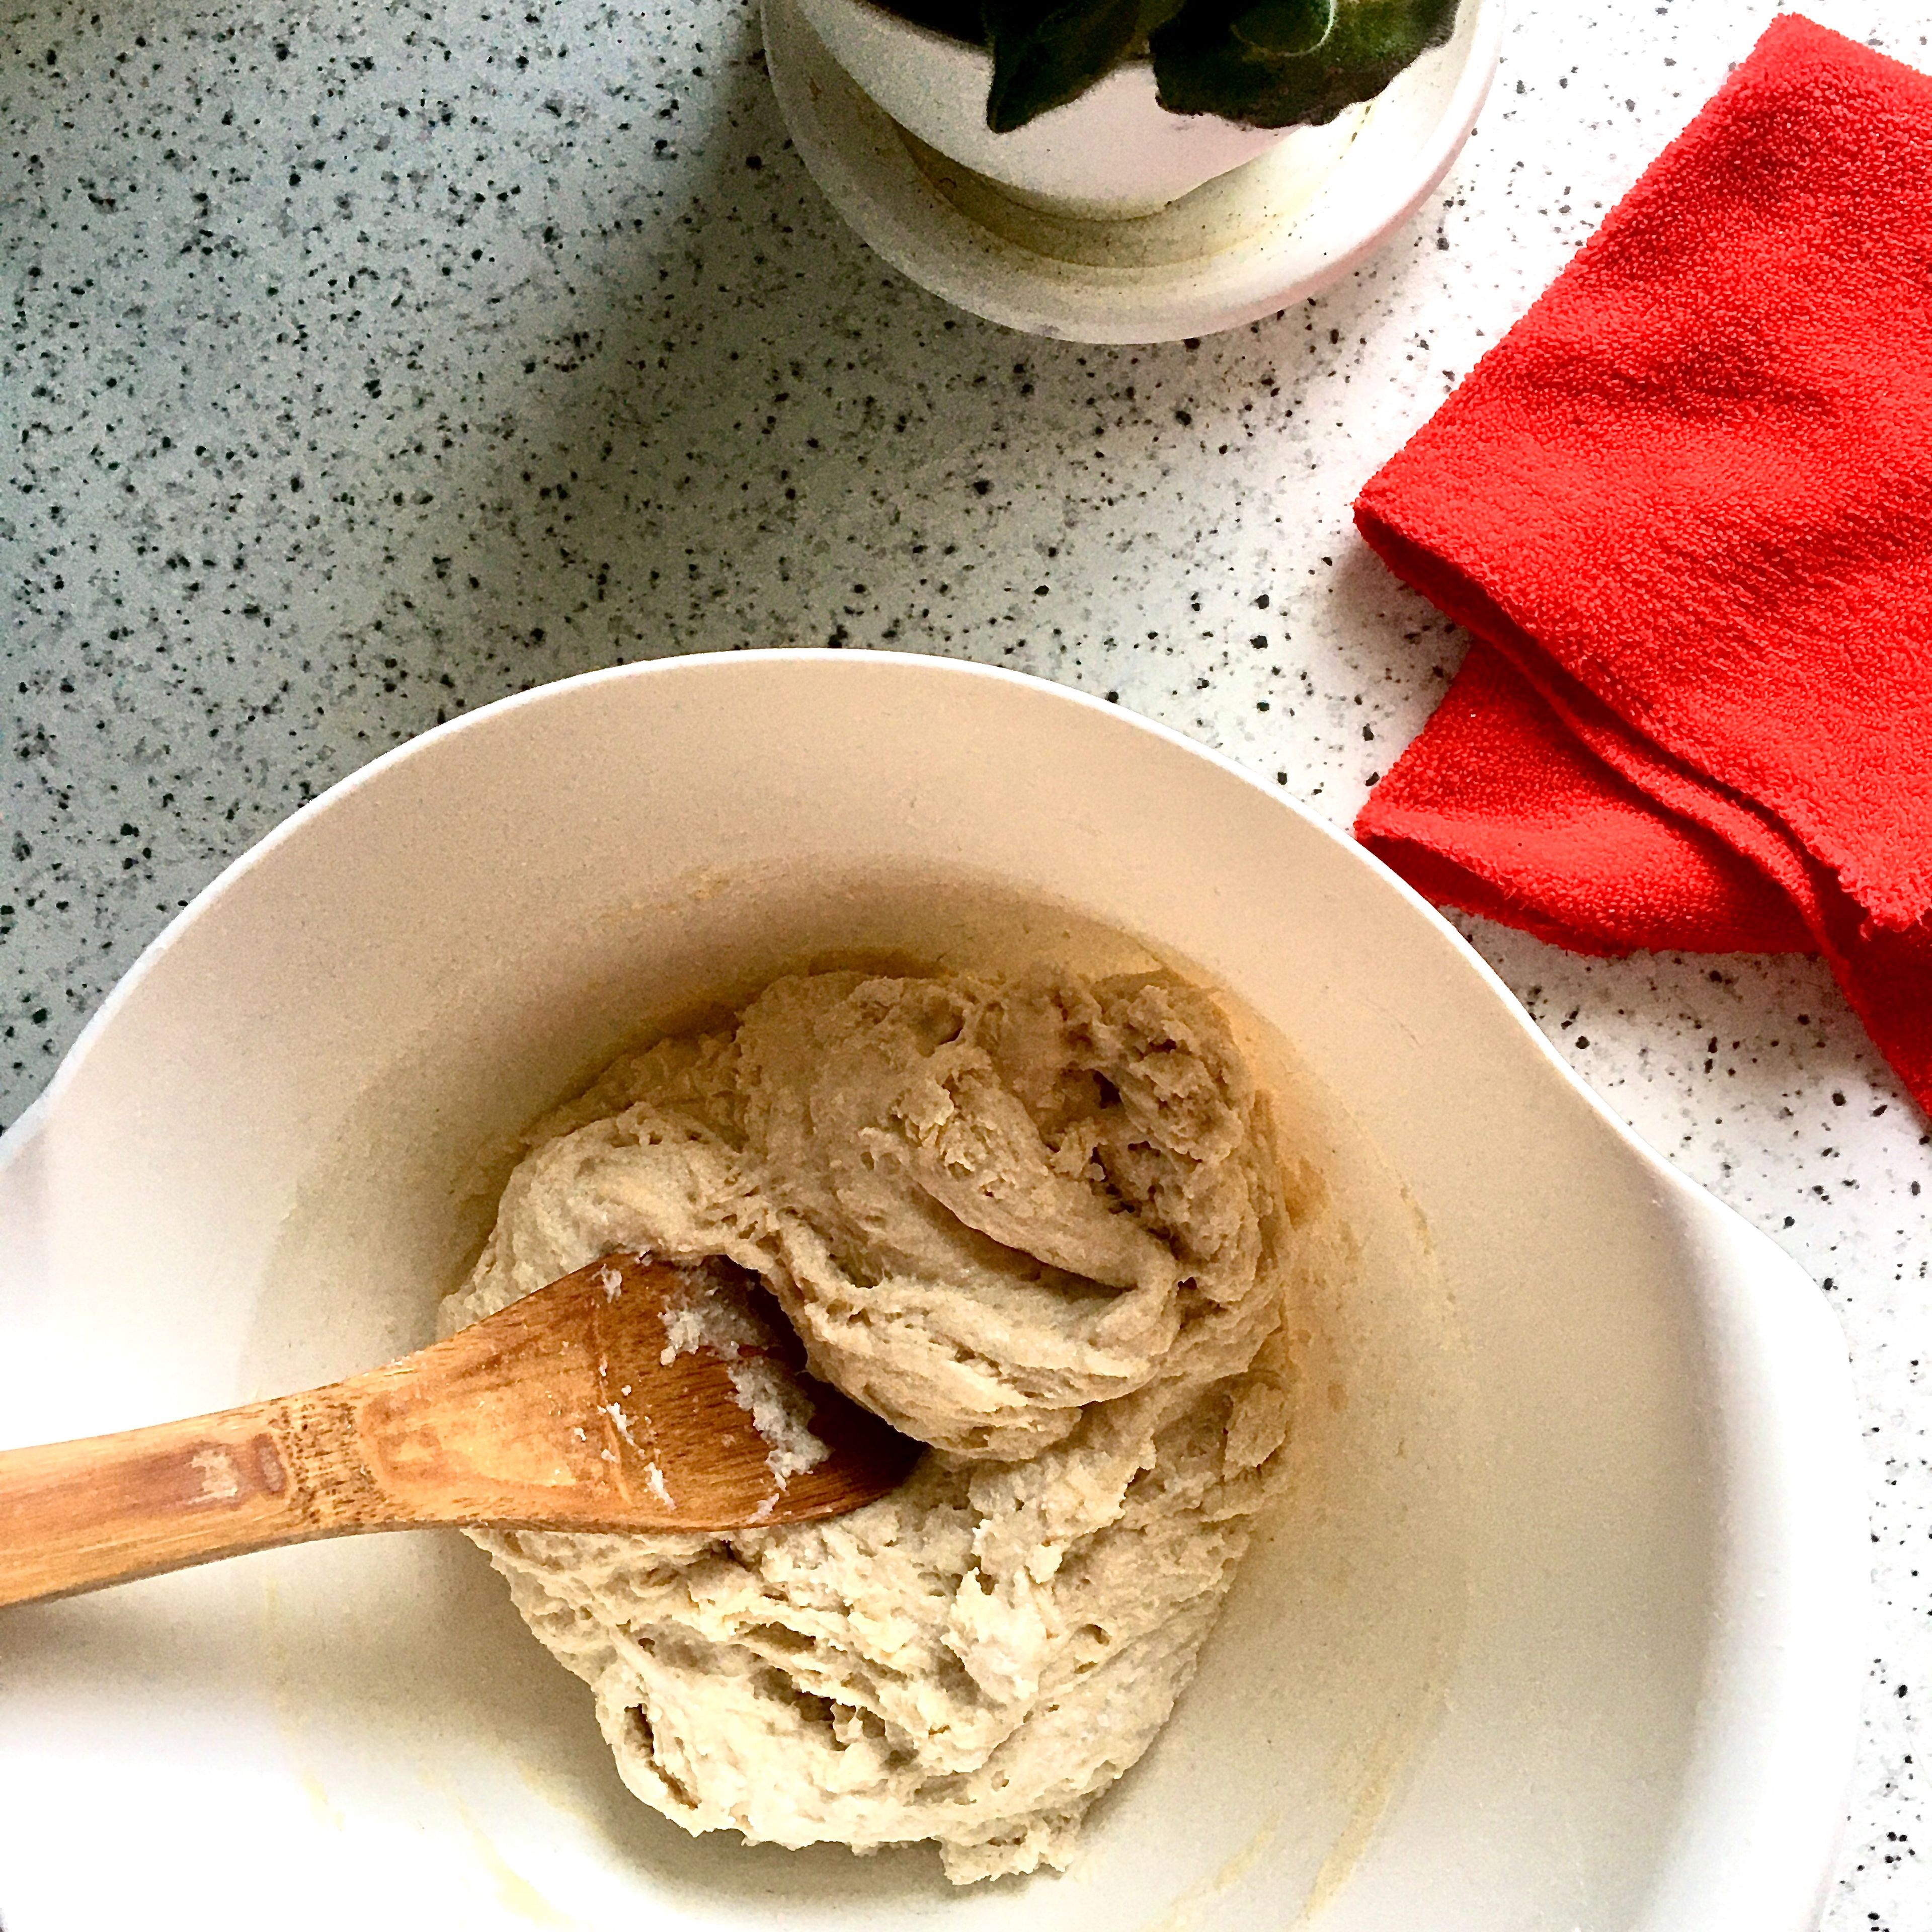 In a large bowl, stir together the sourdough starter with water, milk, yeast, sugar, ricotta cheese and salt. Add the flour and mix with a wooden spoon until the dough comes together.